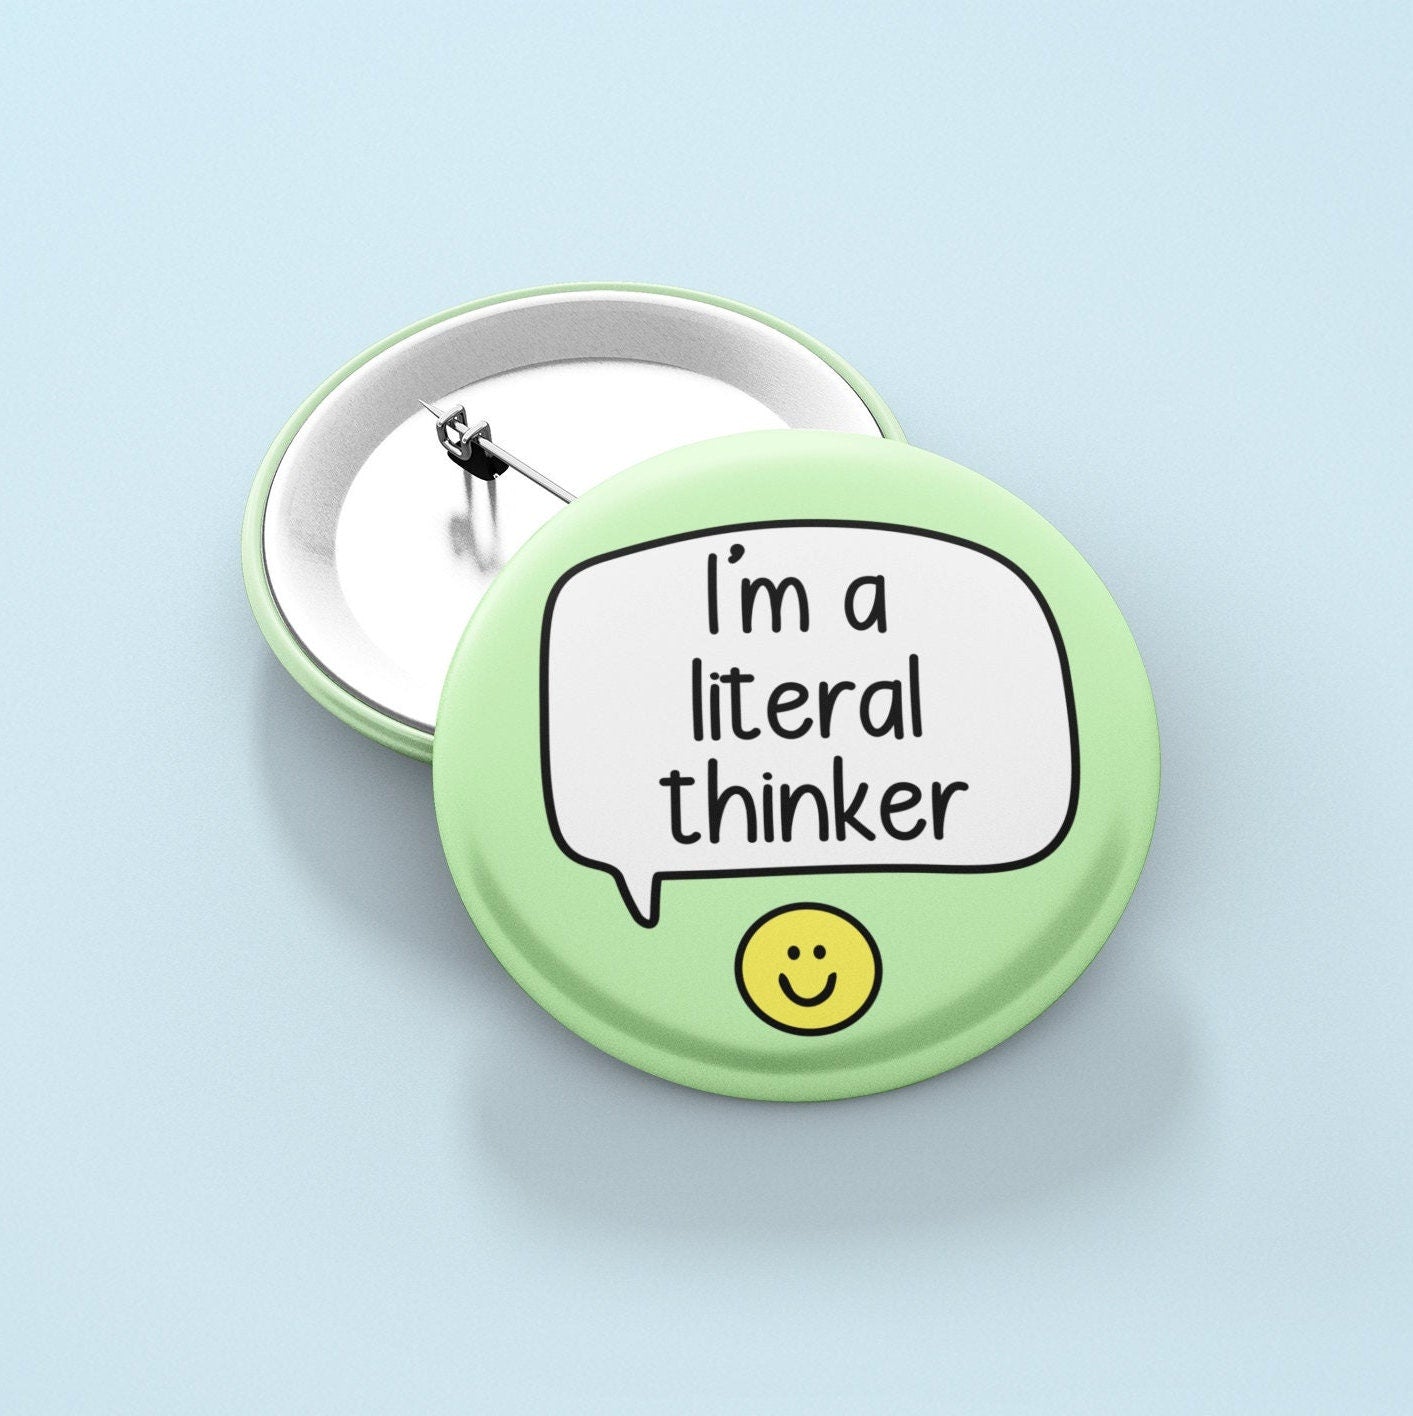 I'm A Literal Thinker - Badge Pin | Neurodivergent Pin - Autism Pins - Autism Awareness - Take things literally